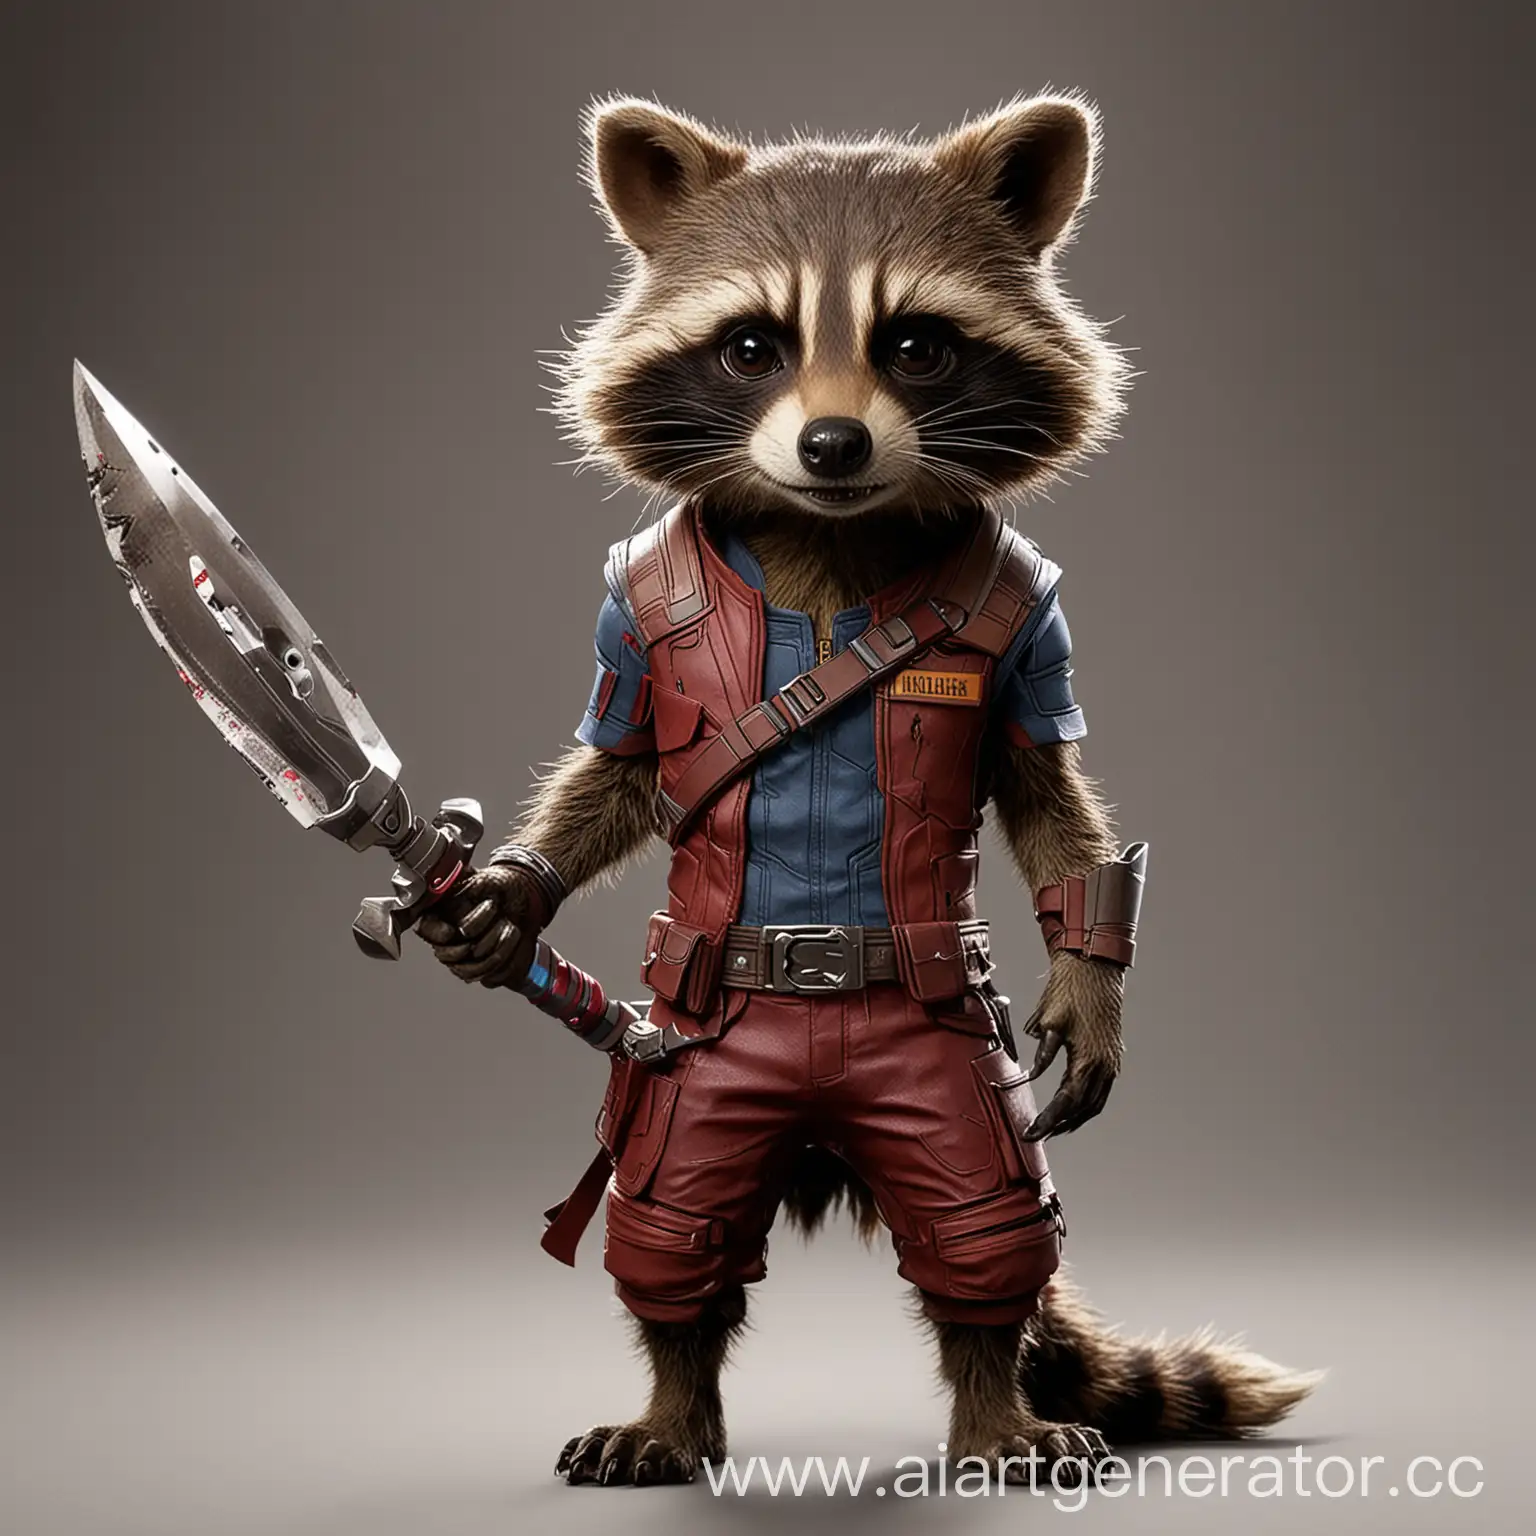 Raccoon-with-Big-Scissors-from-Guardians-of-the-Galaxy-Movie